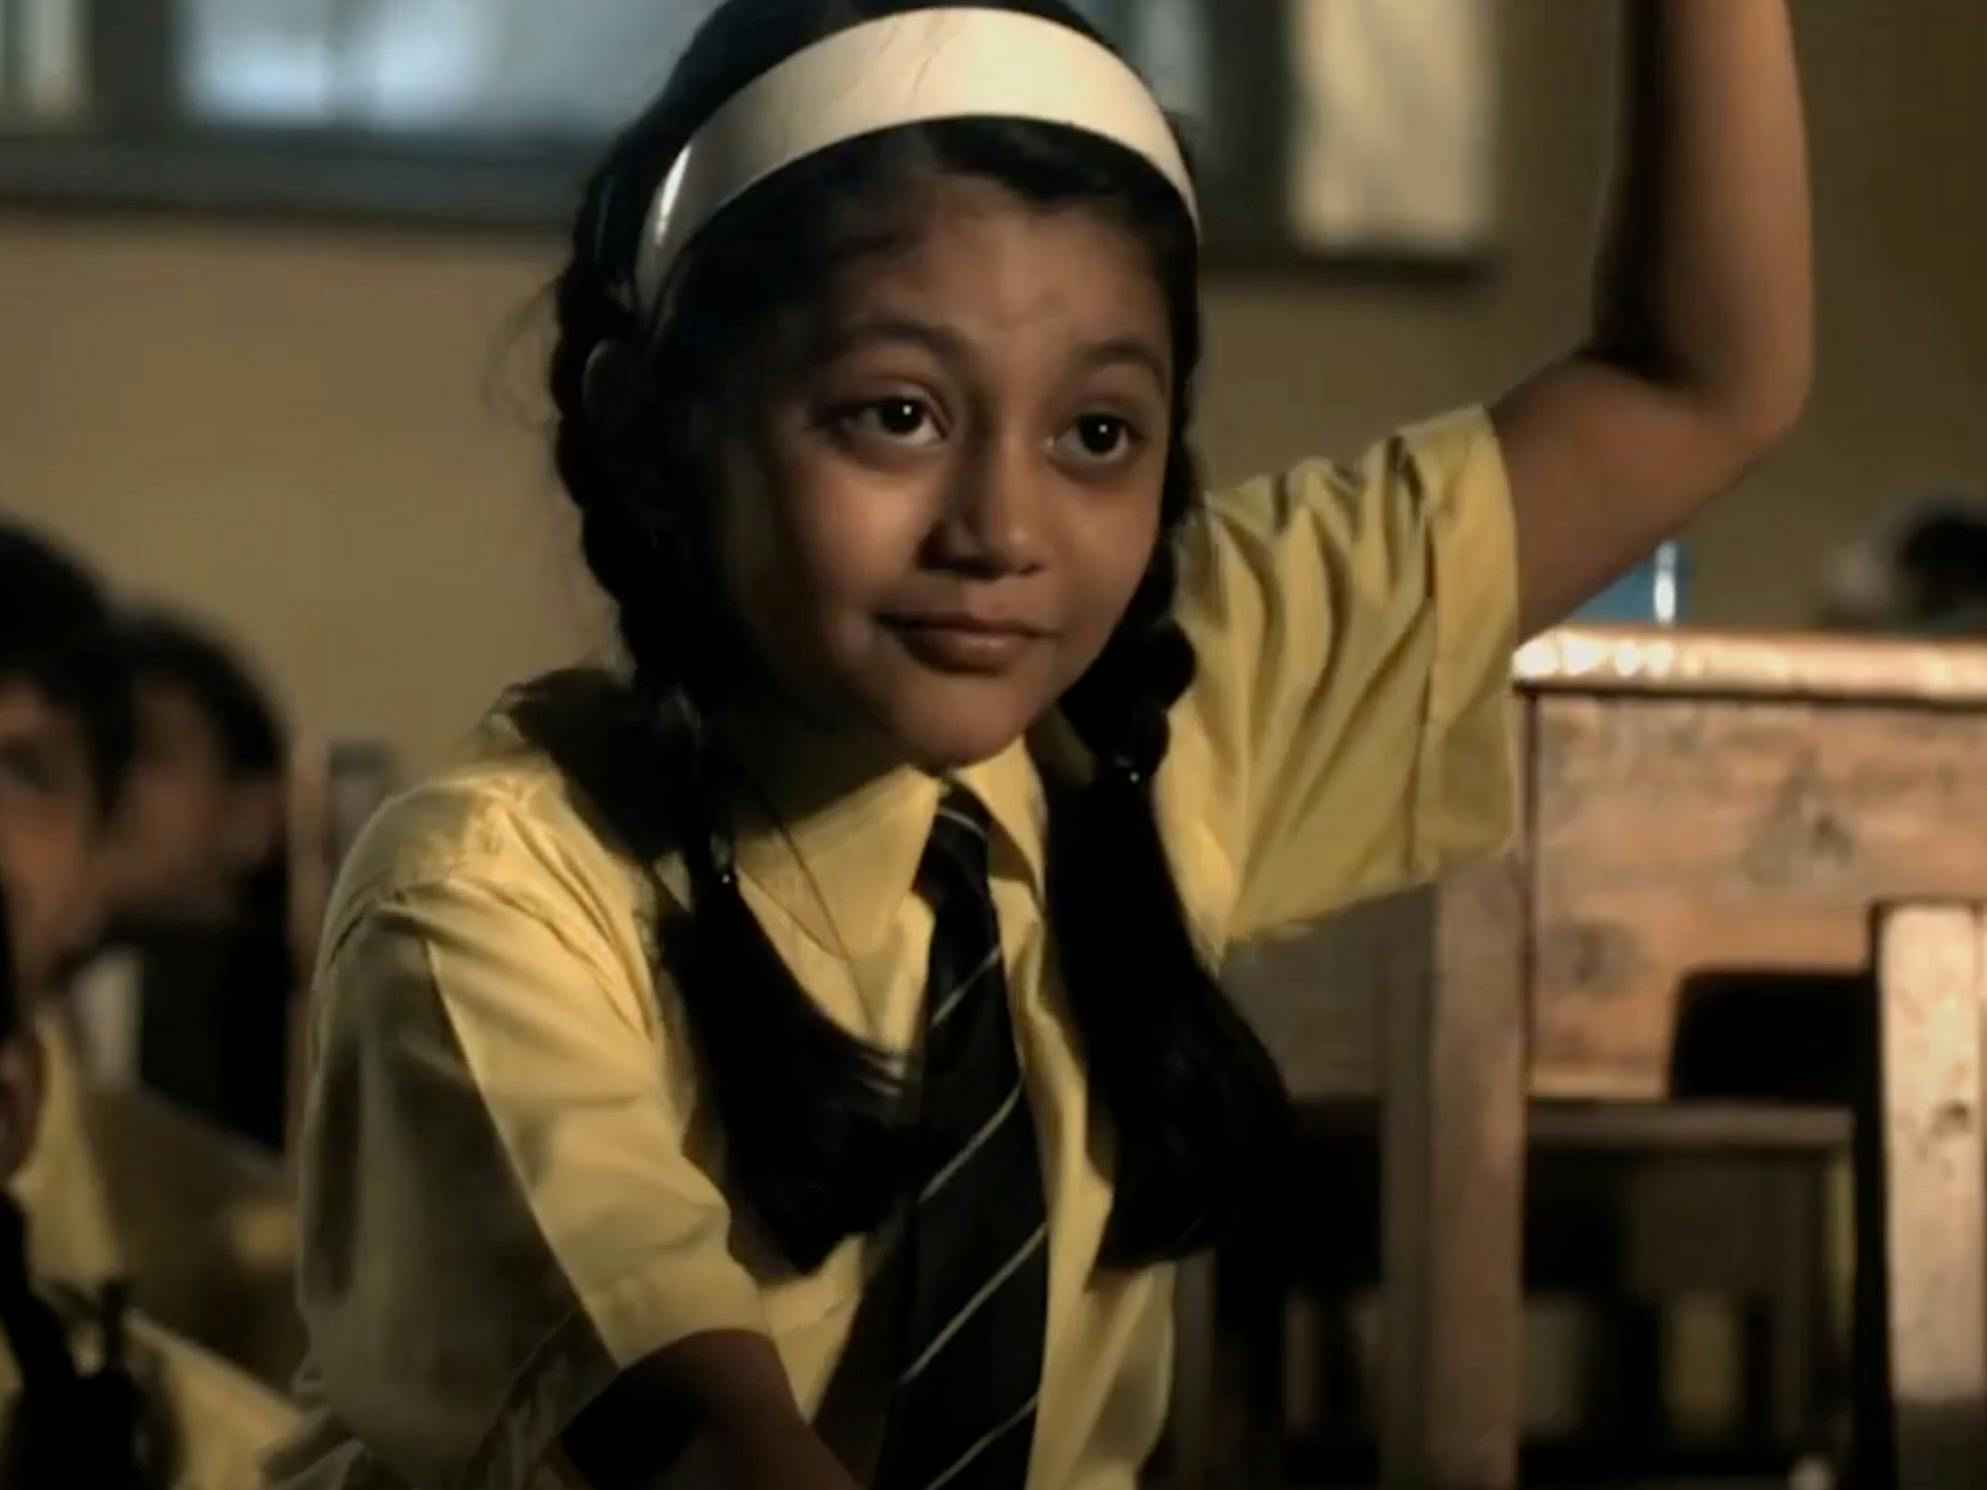 Close-up of a young schoolgirl in uniform and pigtails raising her hand inside a classroom.